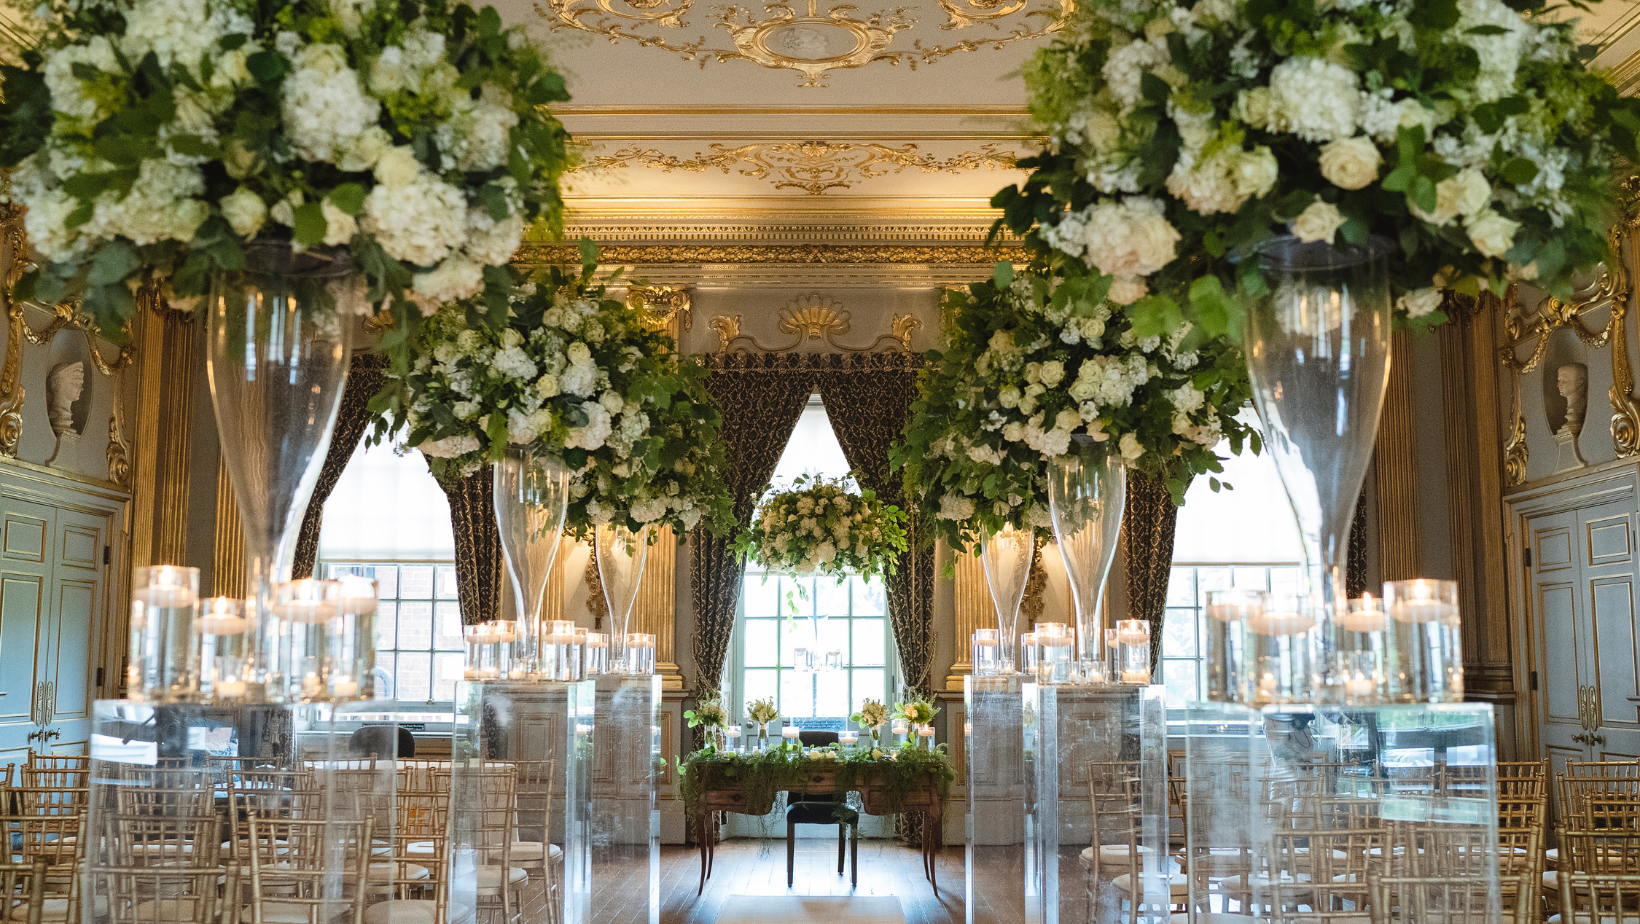 A stunning room filled with beautiful fresh flowers and chairs set for a wedding ceremony